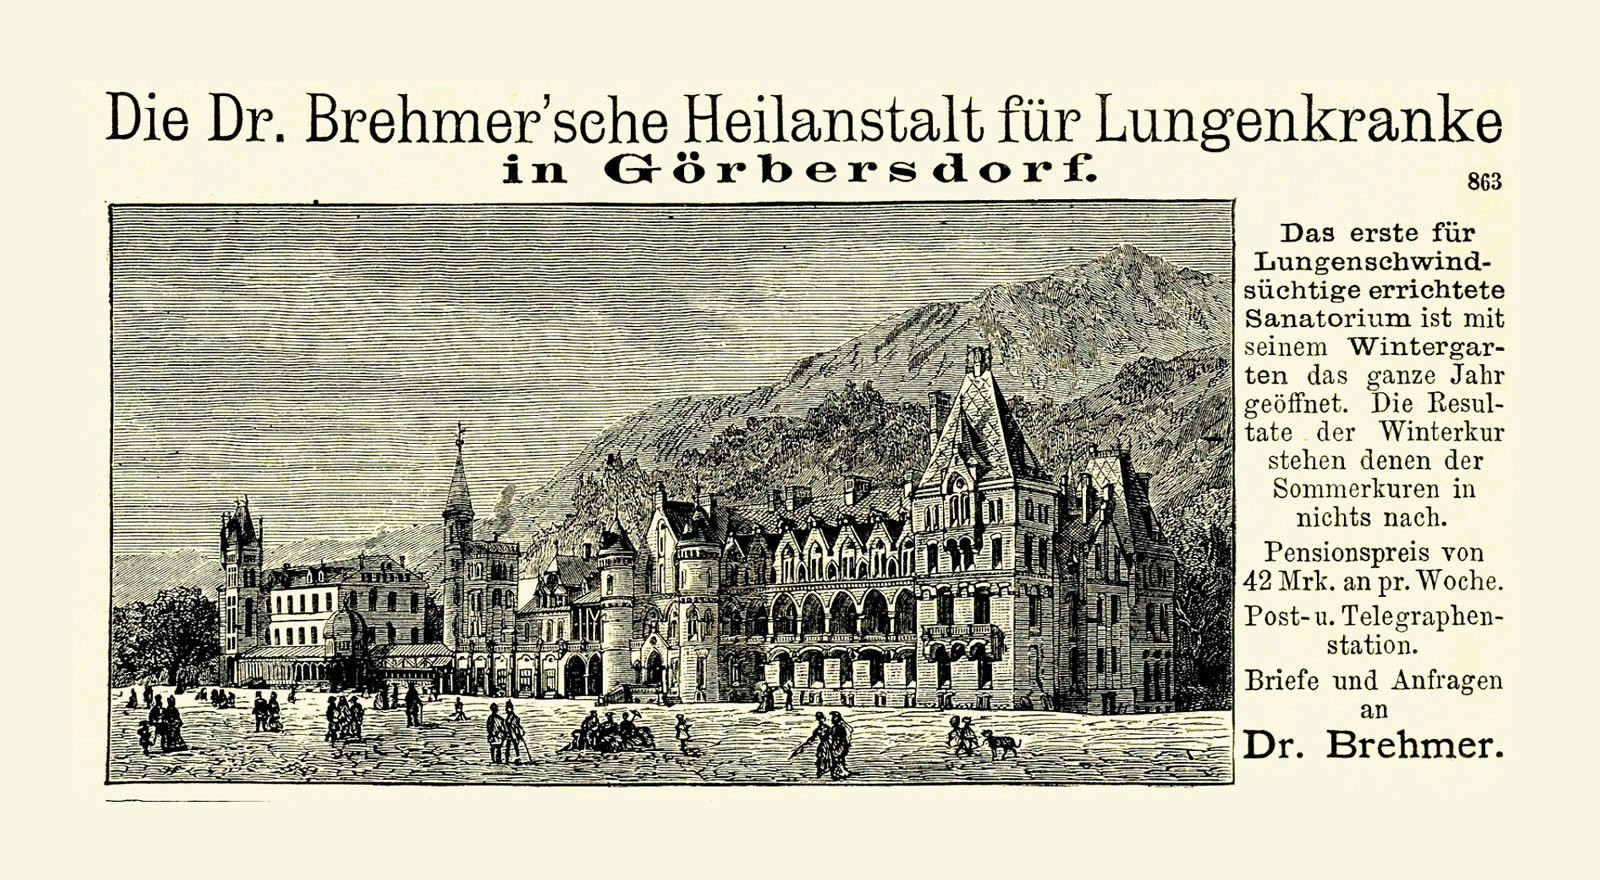 Advertisement for Dr. Brehmer’s sanatorium in Görbersdorf, ca. 1880. The text to the right of the image reads: “The first sanatorium built for consumptives is open all year with its winter garden conservatory. The results of the winter cure are in no way inferior to those of the summer cure. Room and board from 42 marks per week. Post and telegraph station. Direct letters and inquiries to  Dr. Brehmer.”